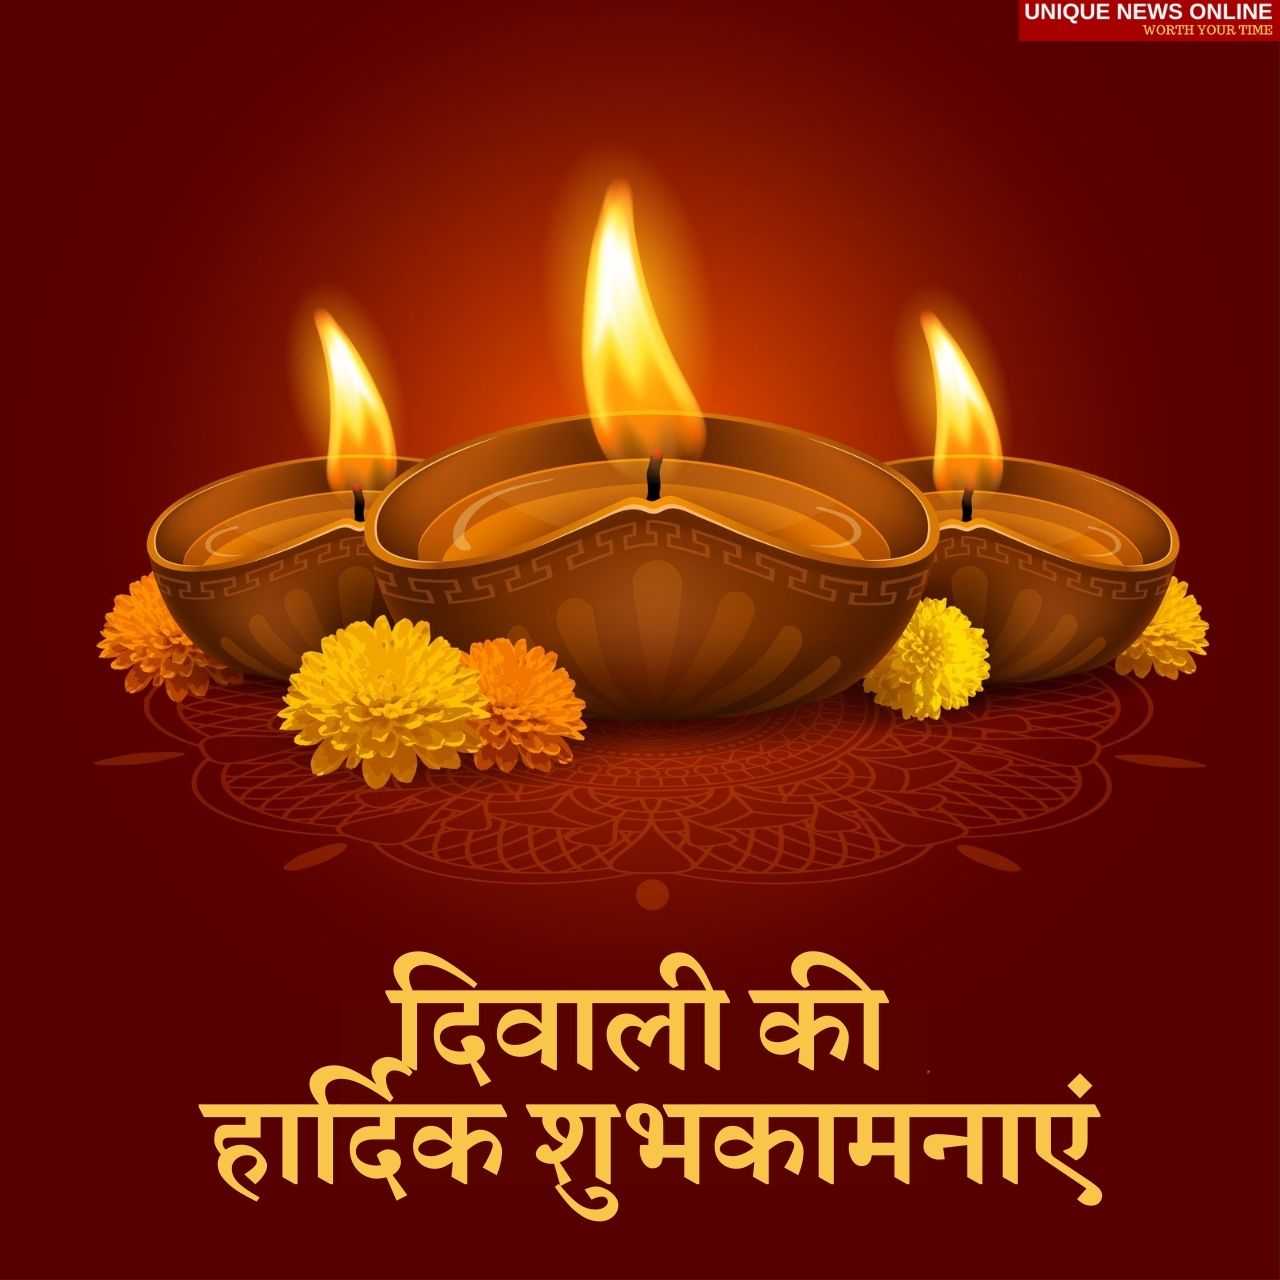 Happy Diwali 2021 Hindi Wishes, Greetings, Shayari, HD Images, Quotes, and Messages to Share